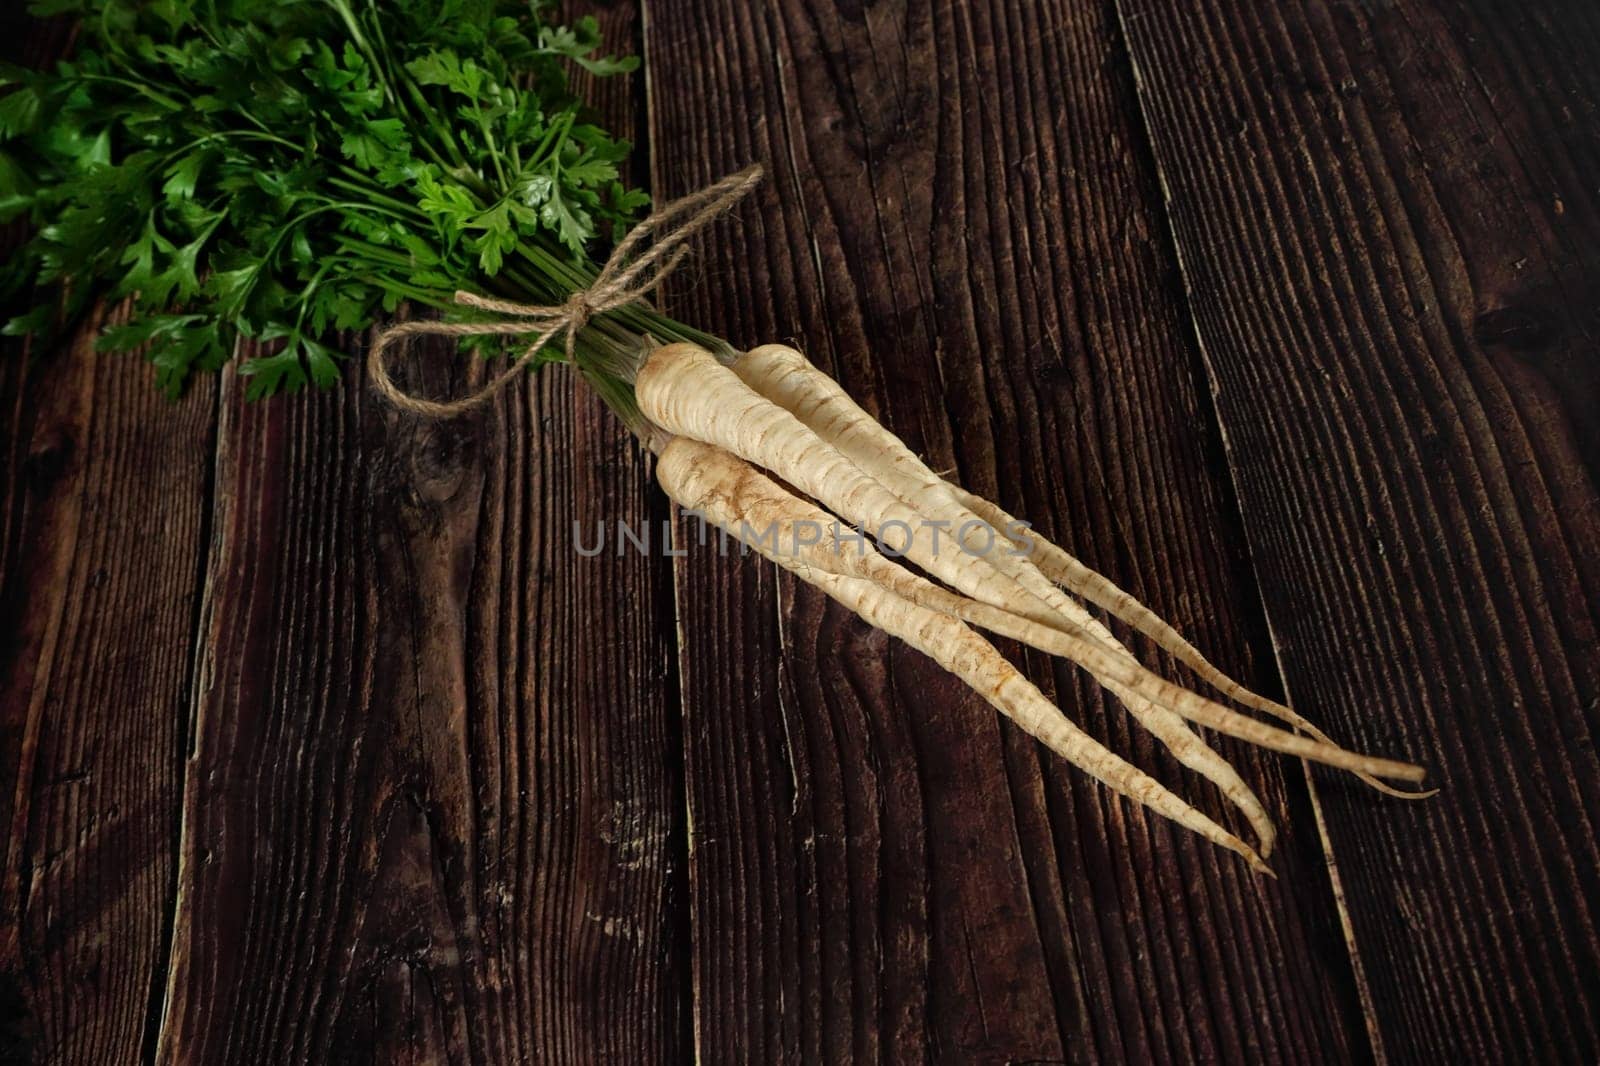 Bunch of parsley / parsnip roots with green leaves lying on dark wooden rustic board